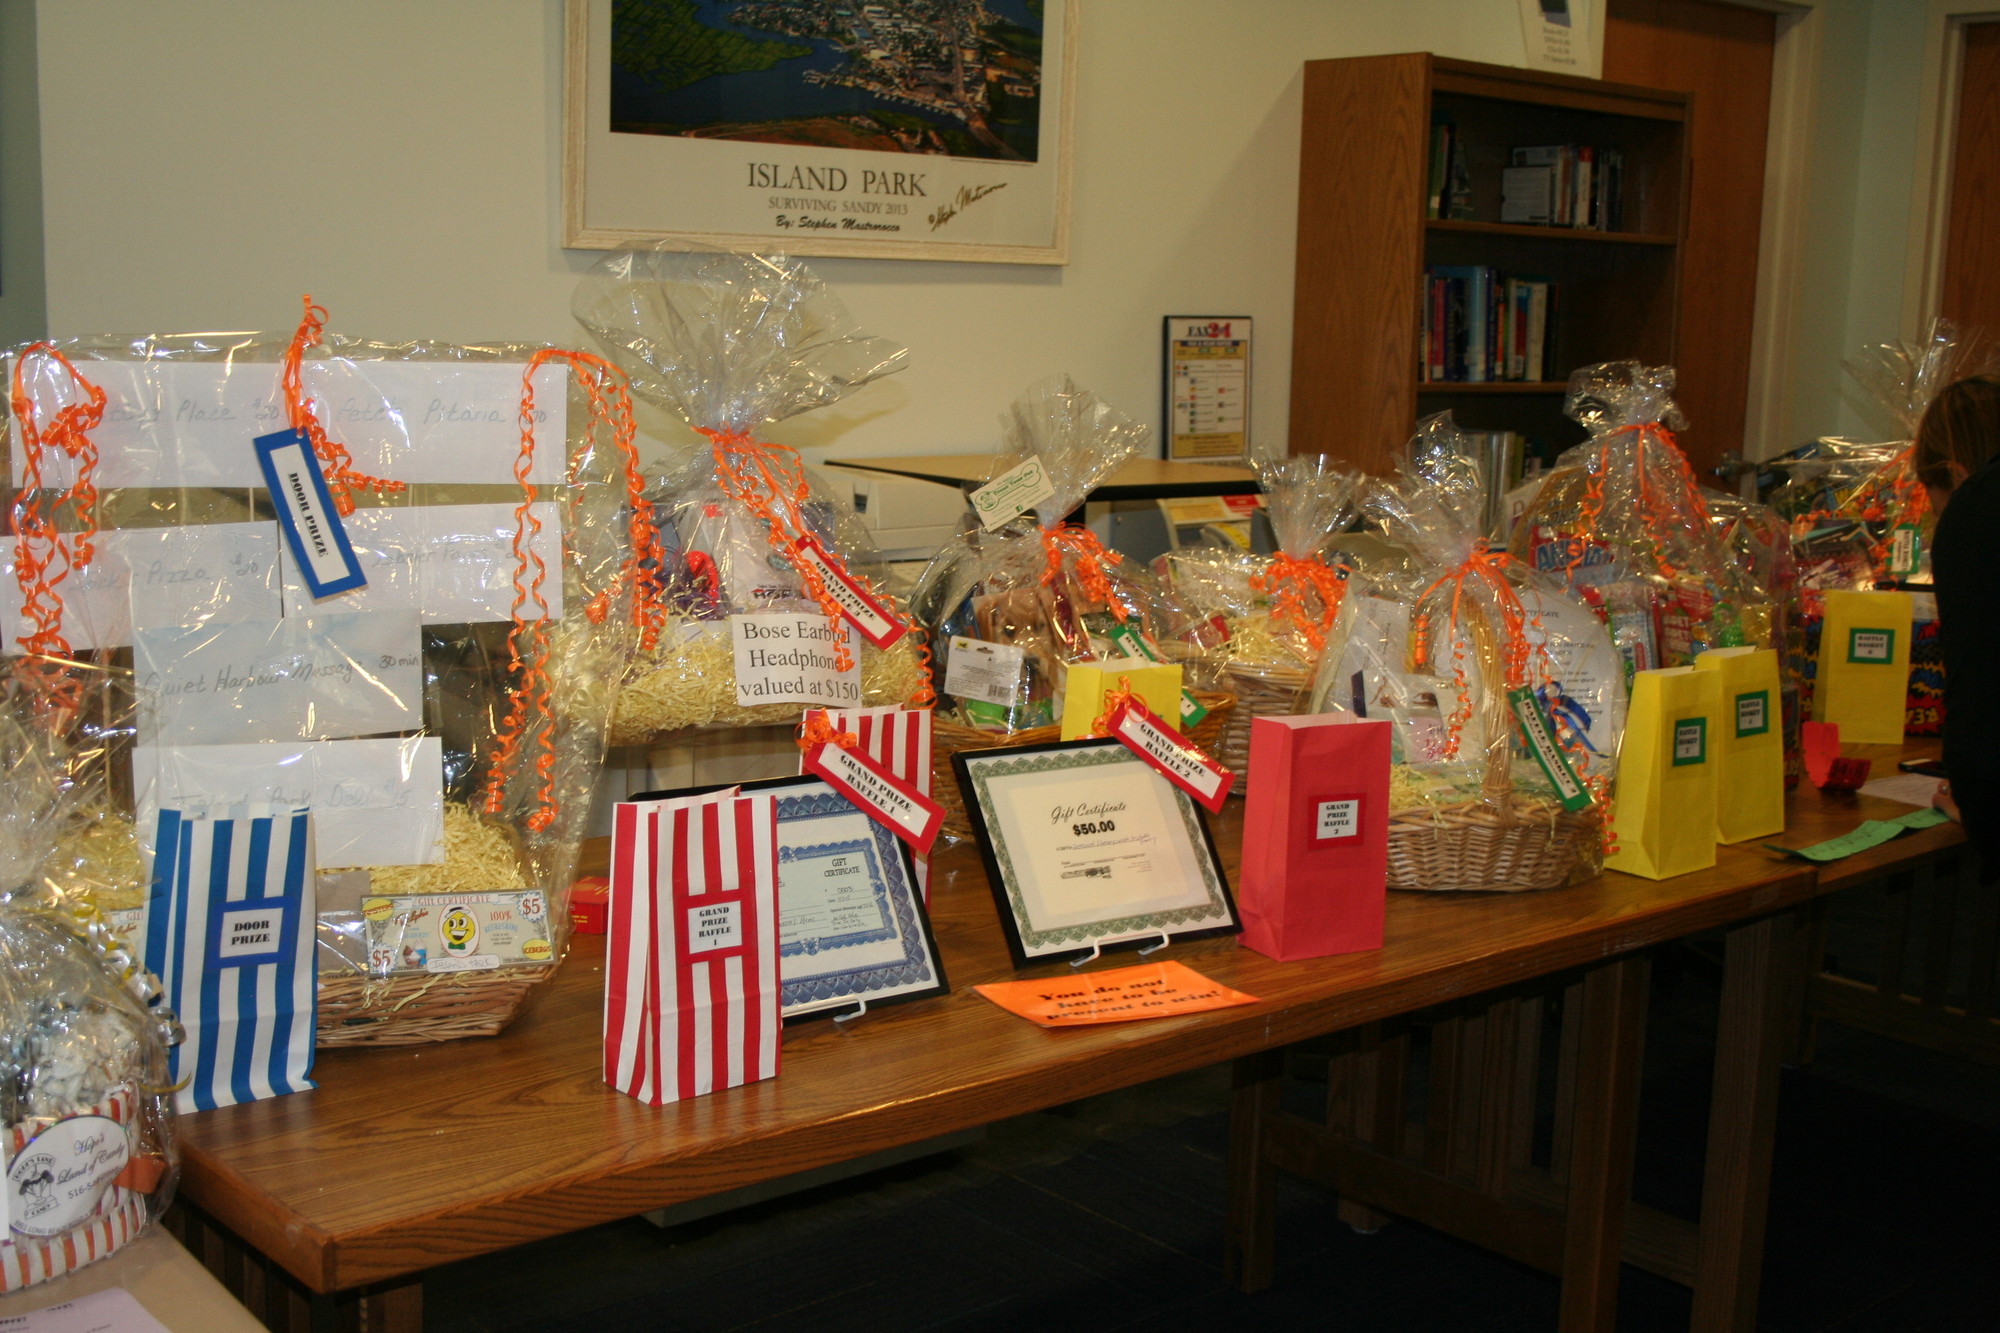 The raffle baskets covered an entire table with goodies.